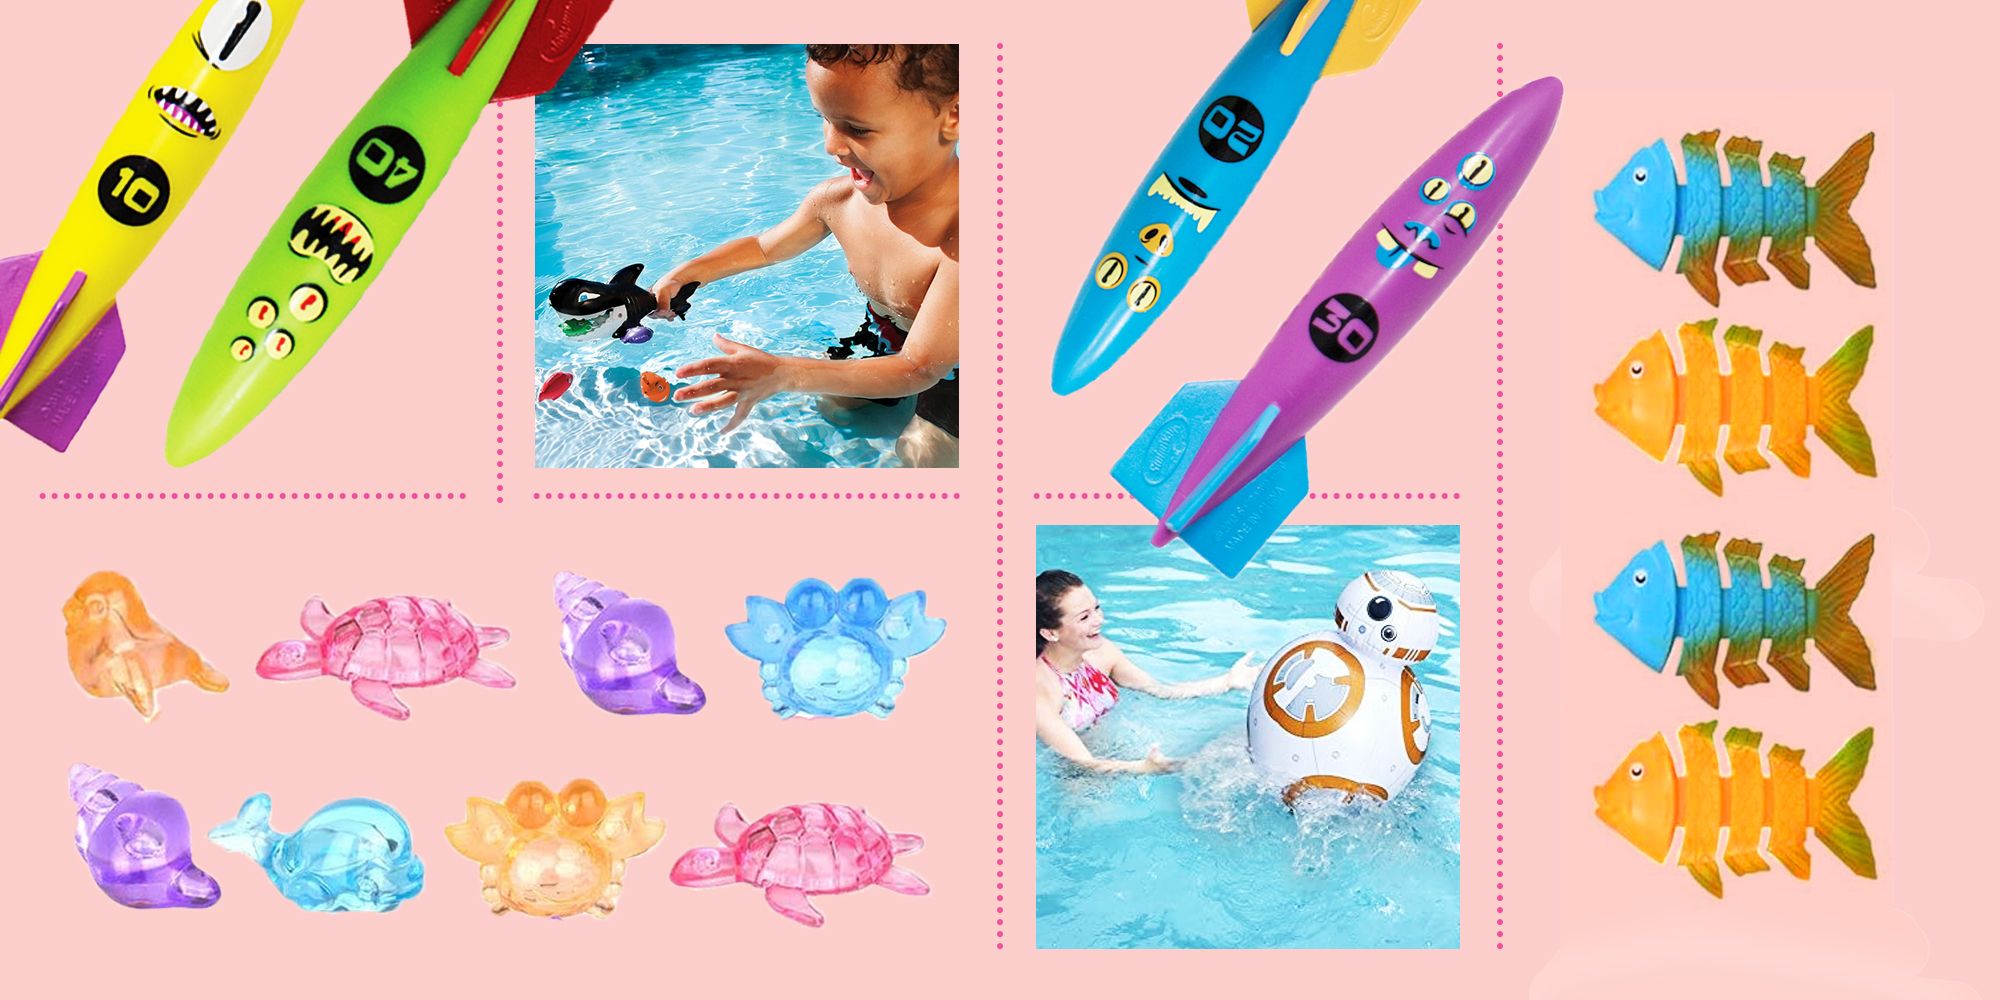 pool toys for 5 year olds